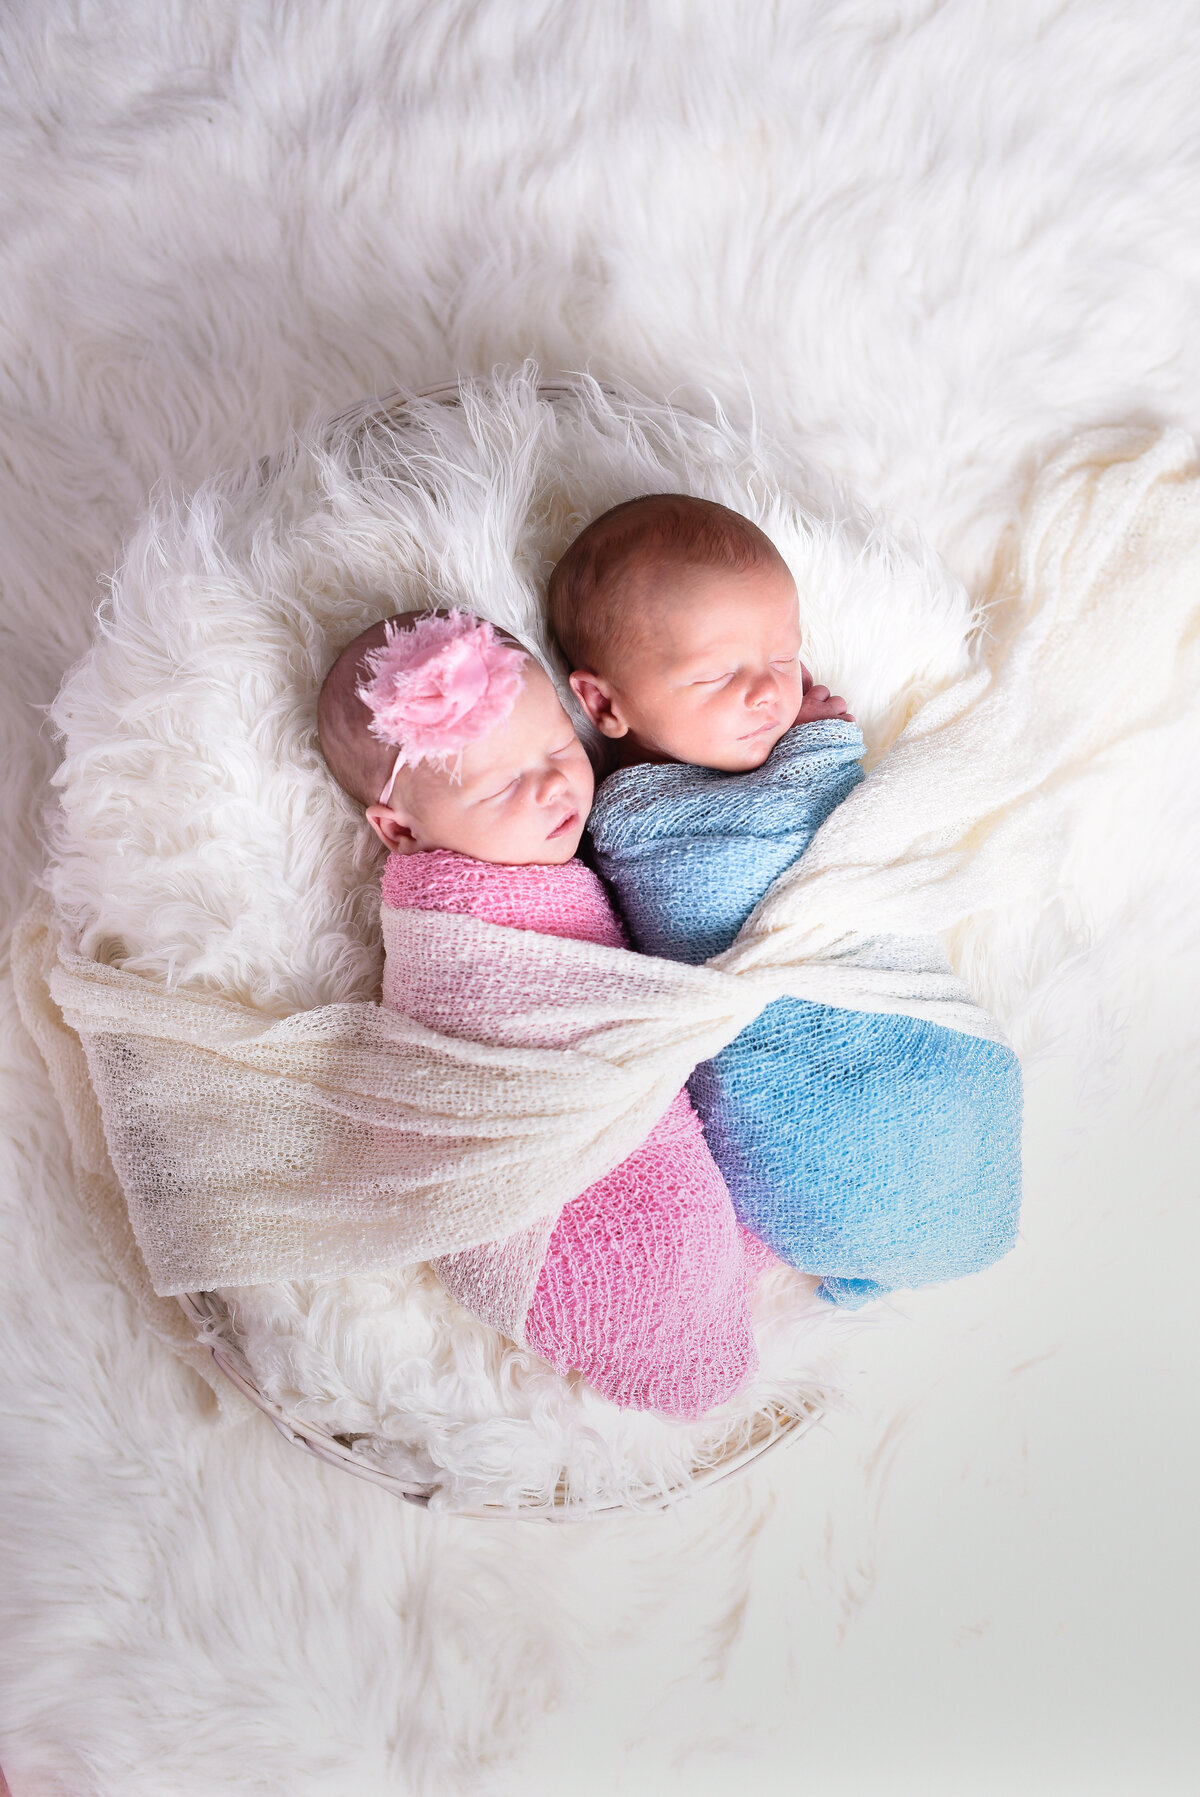 Beautiful Mississippi newborn photography: Twin newborns wrapped in pink and blue